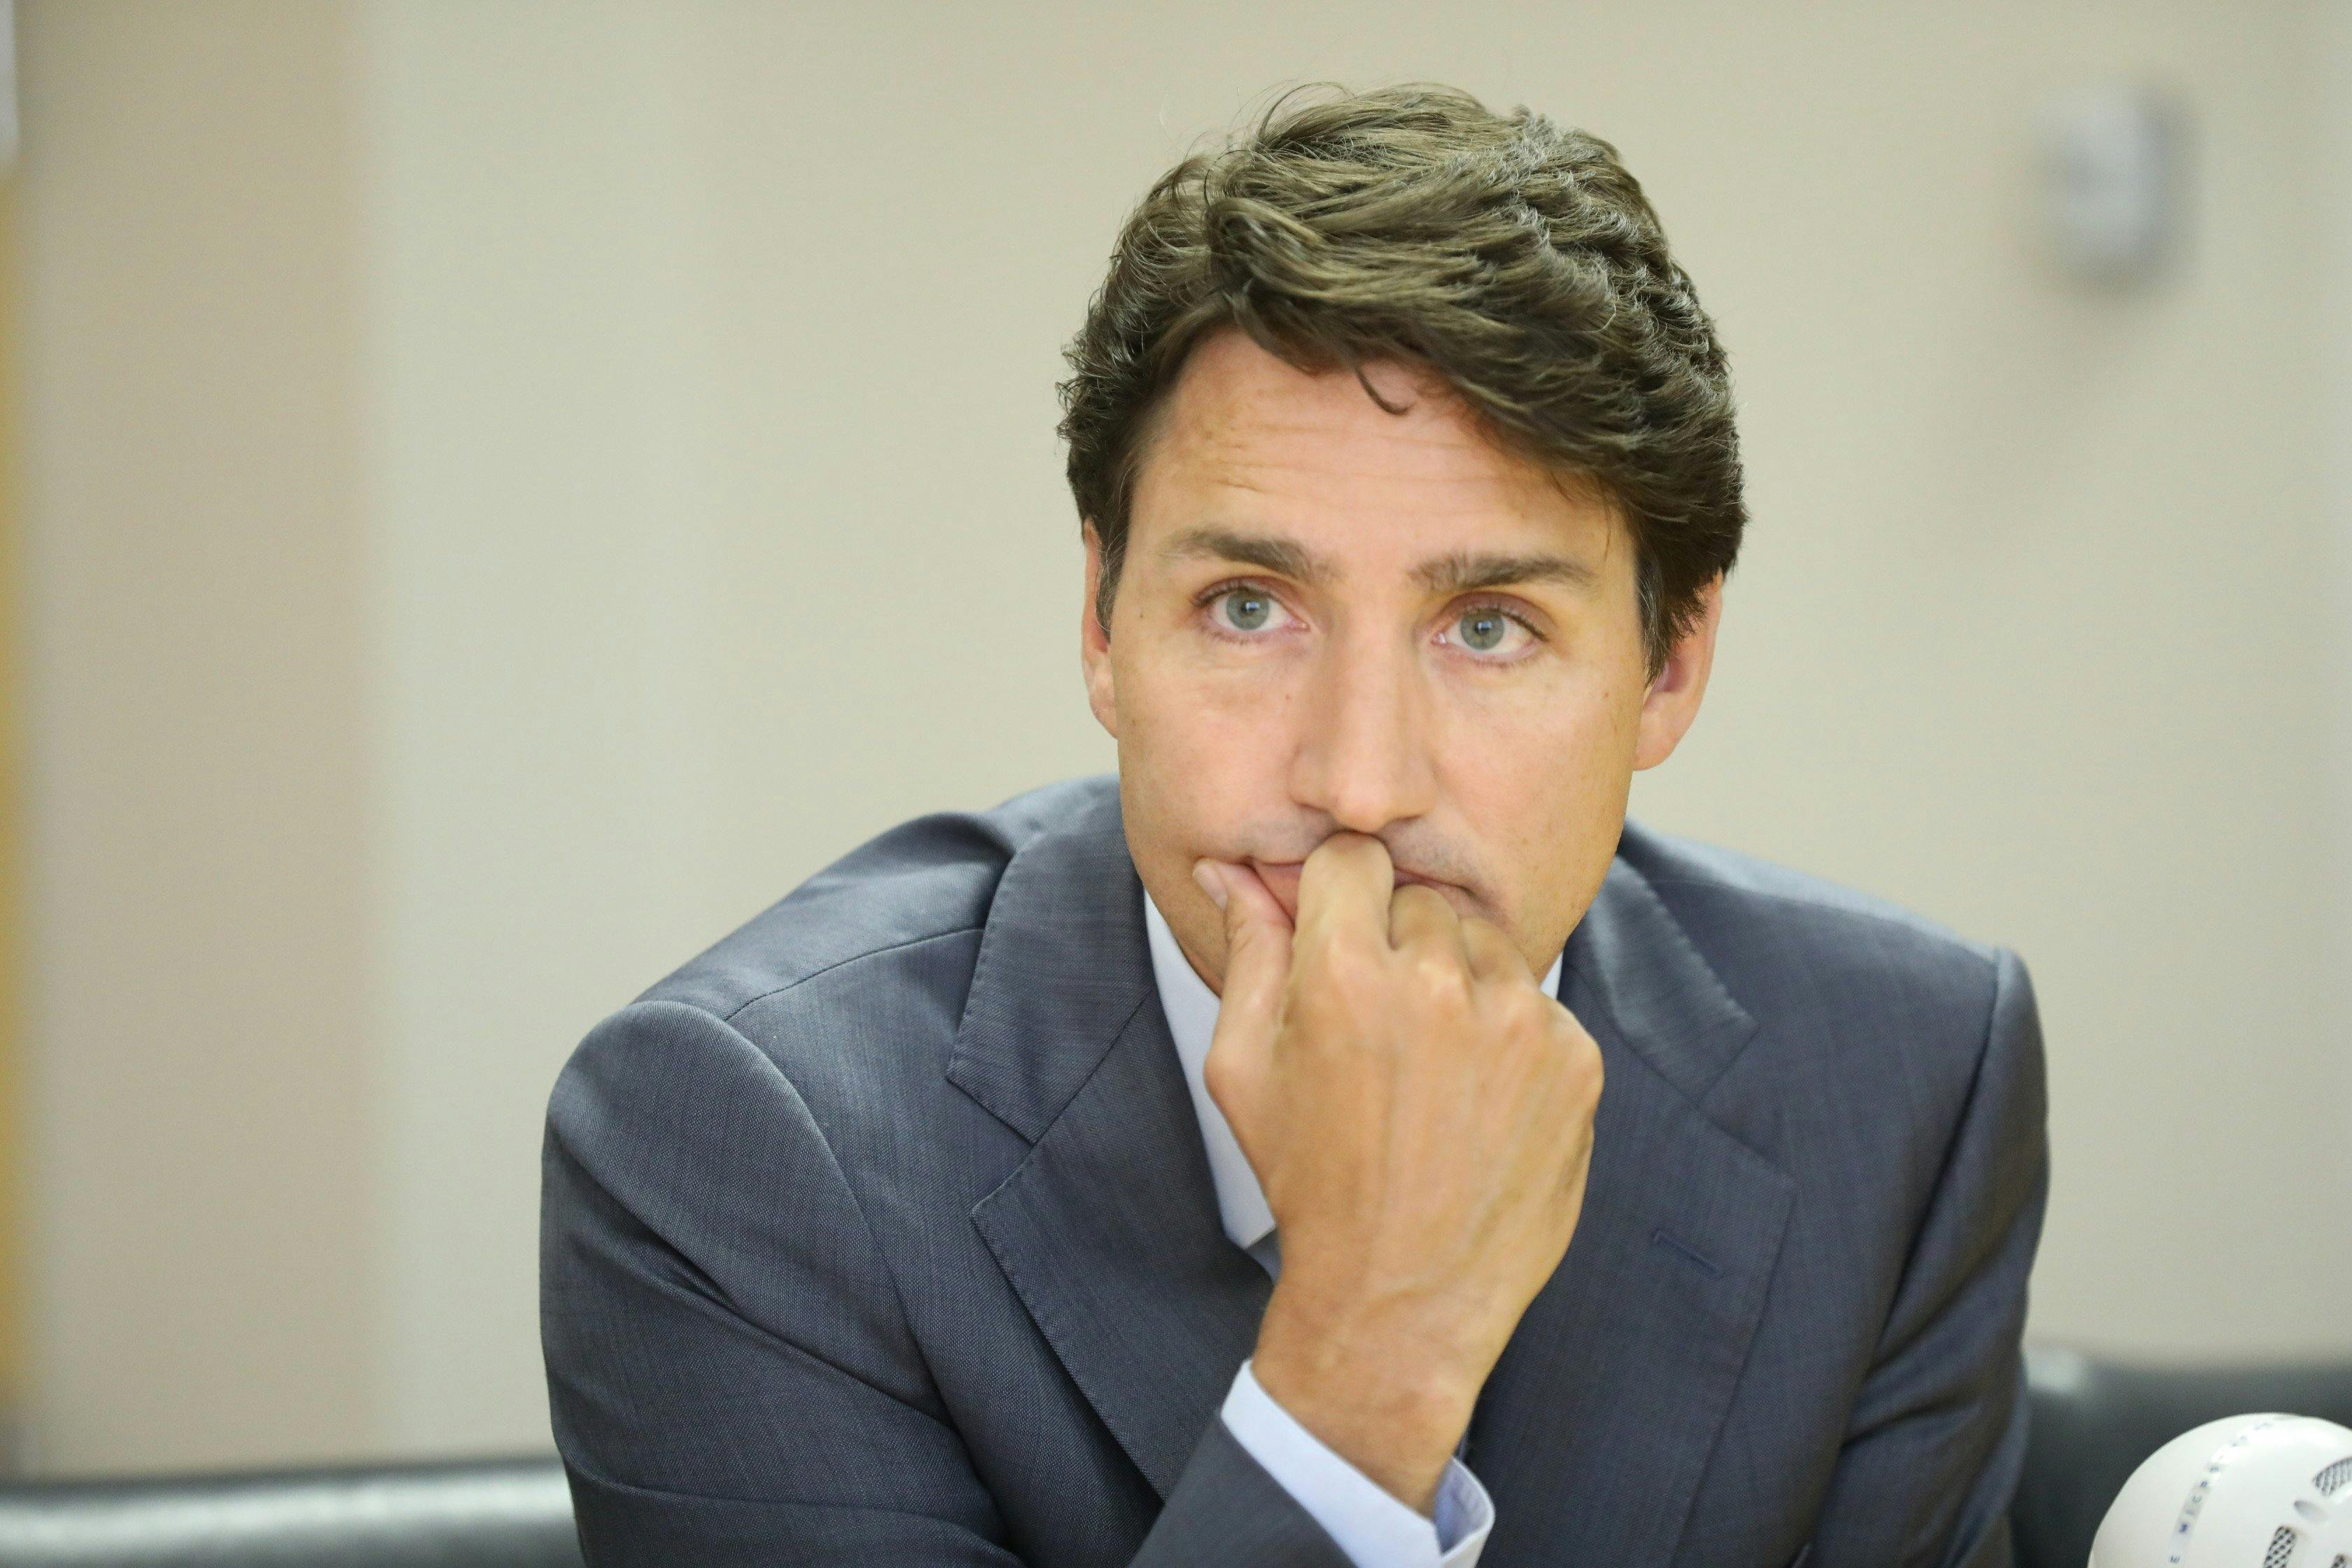 Trudeau’s assignments to ministers that impact Ontario